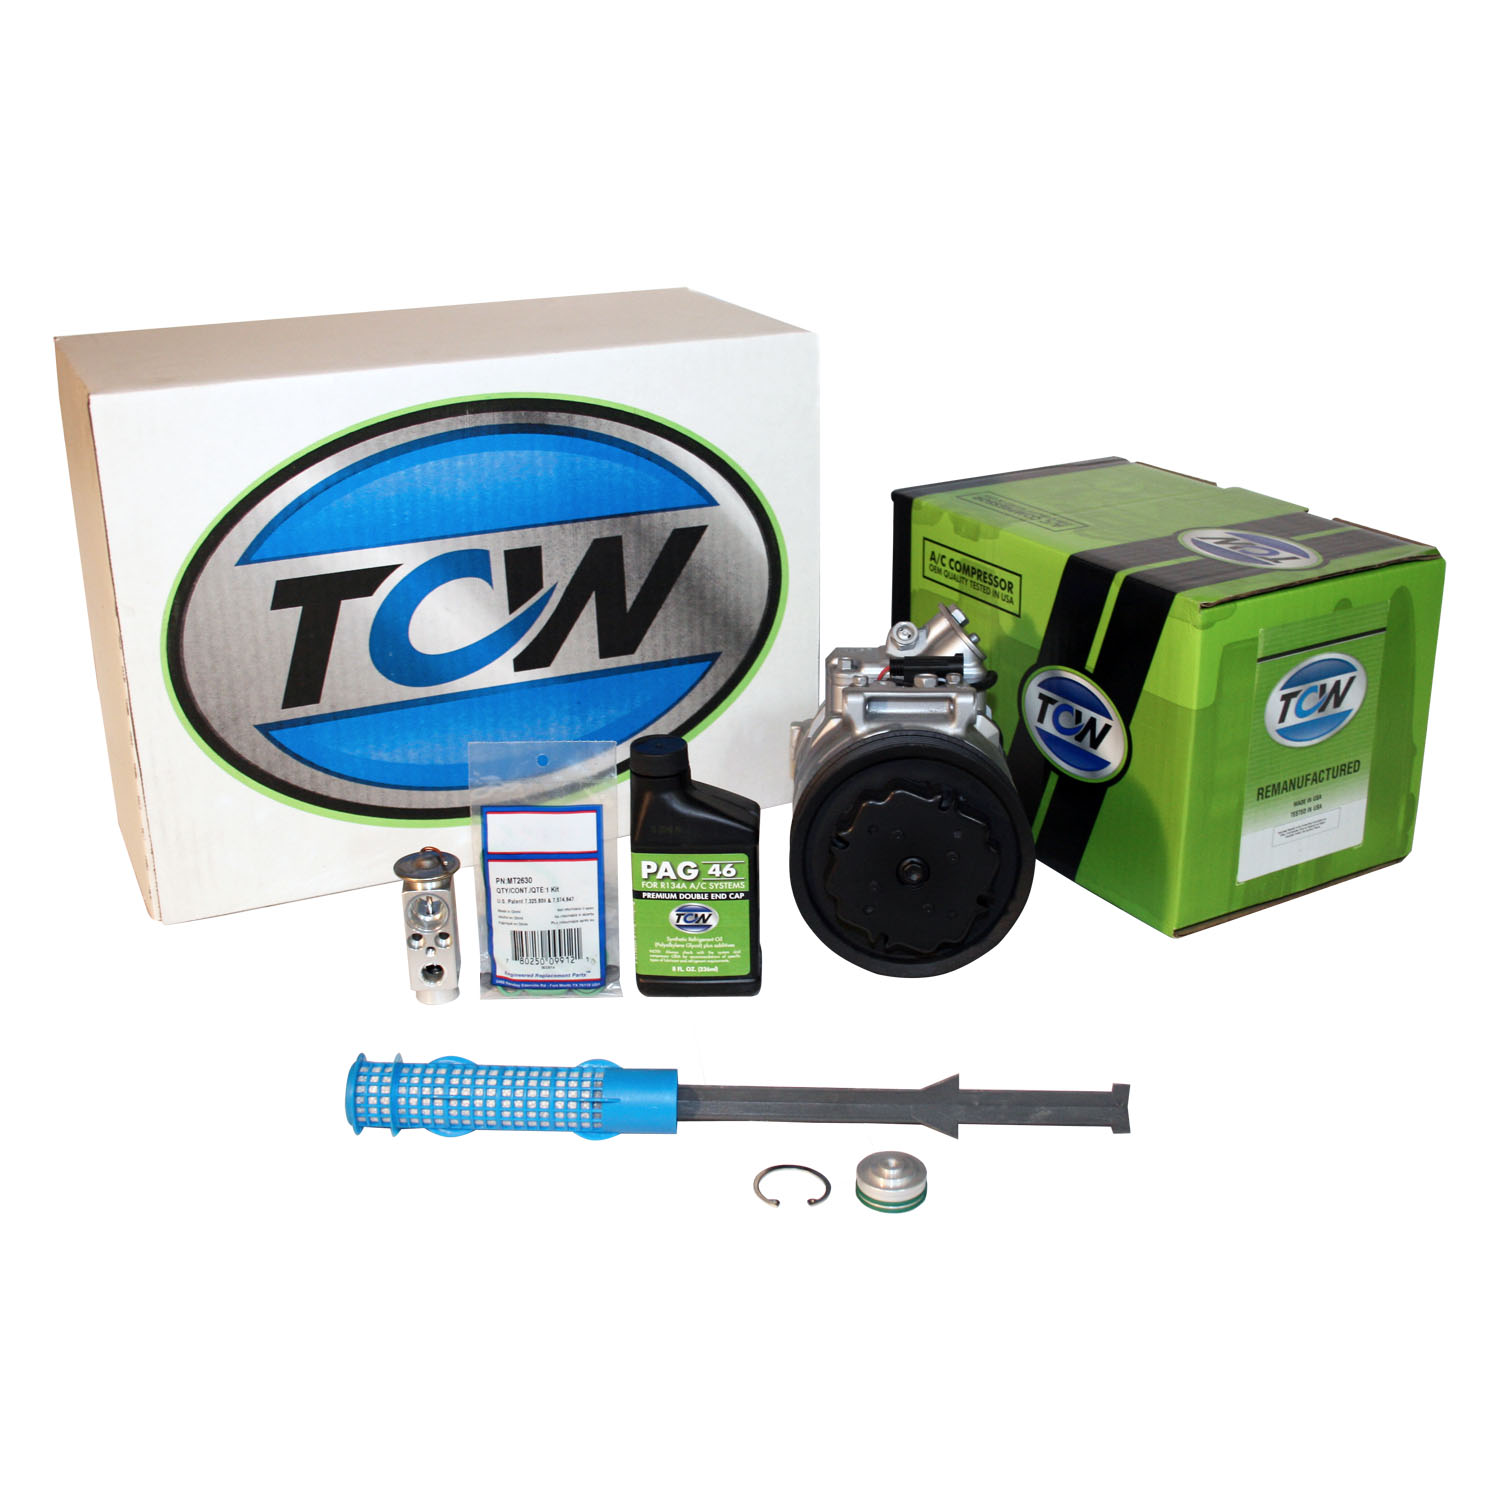 TCW Vehicle A/C Kit K1000431R Remanufactured Product Image field_60b6a13a6e67c